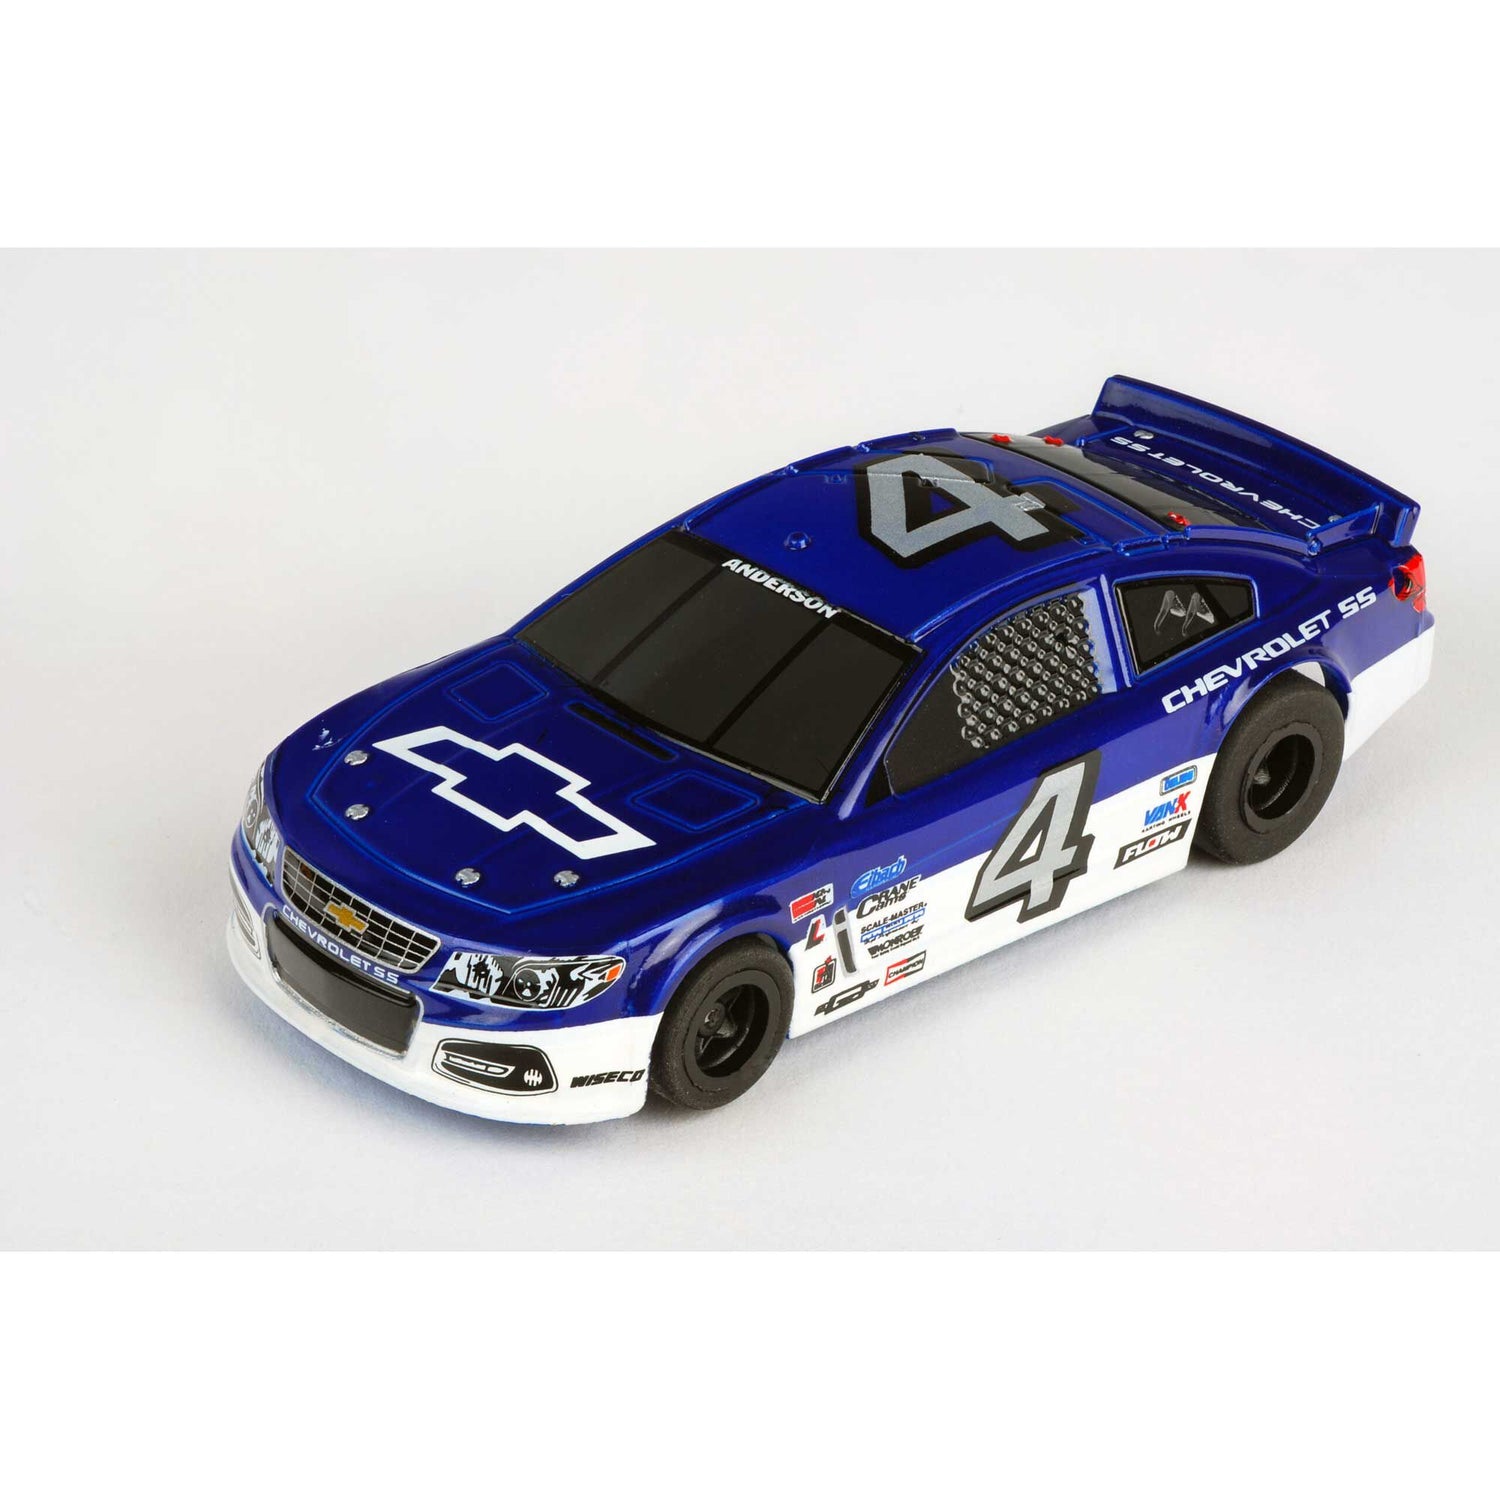 Blue and white AFX Stock Car HO Scale Slot Cars